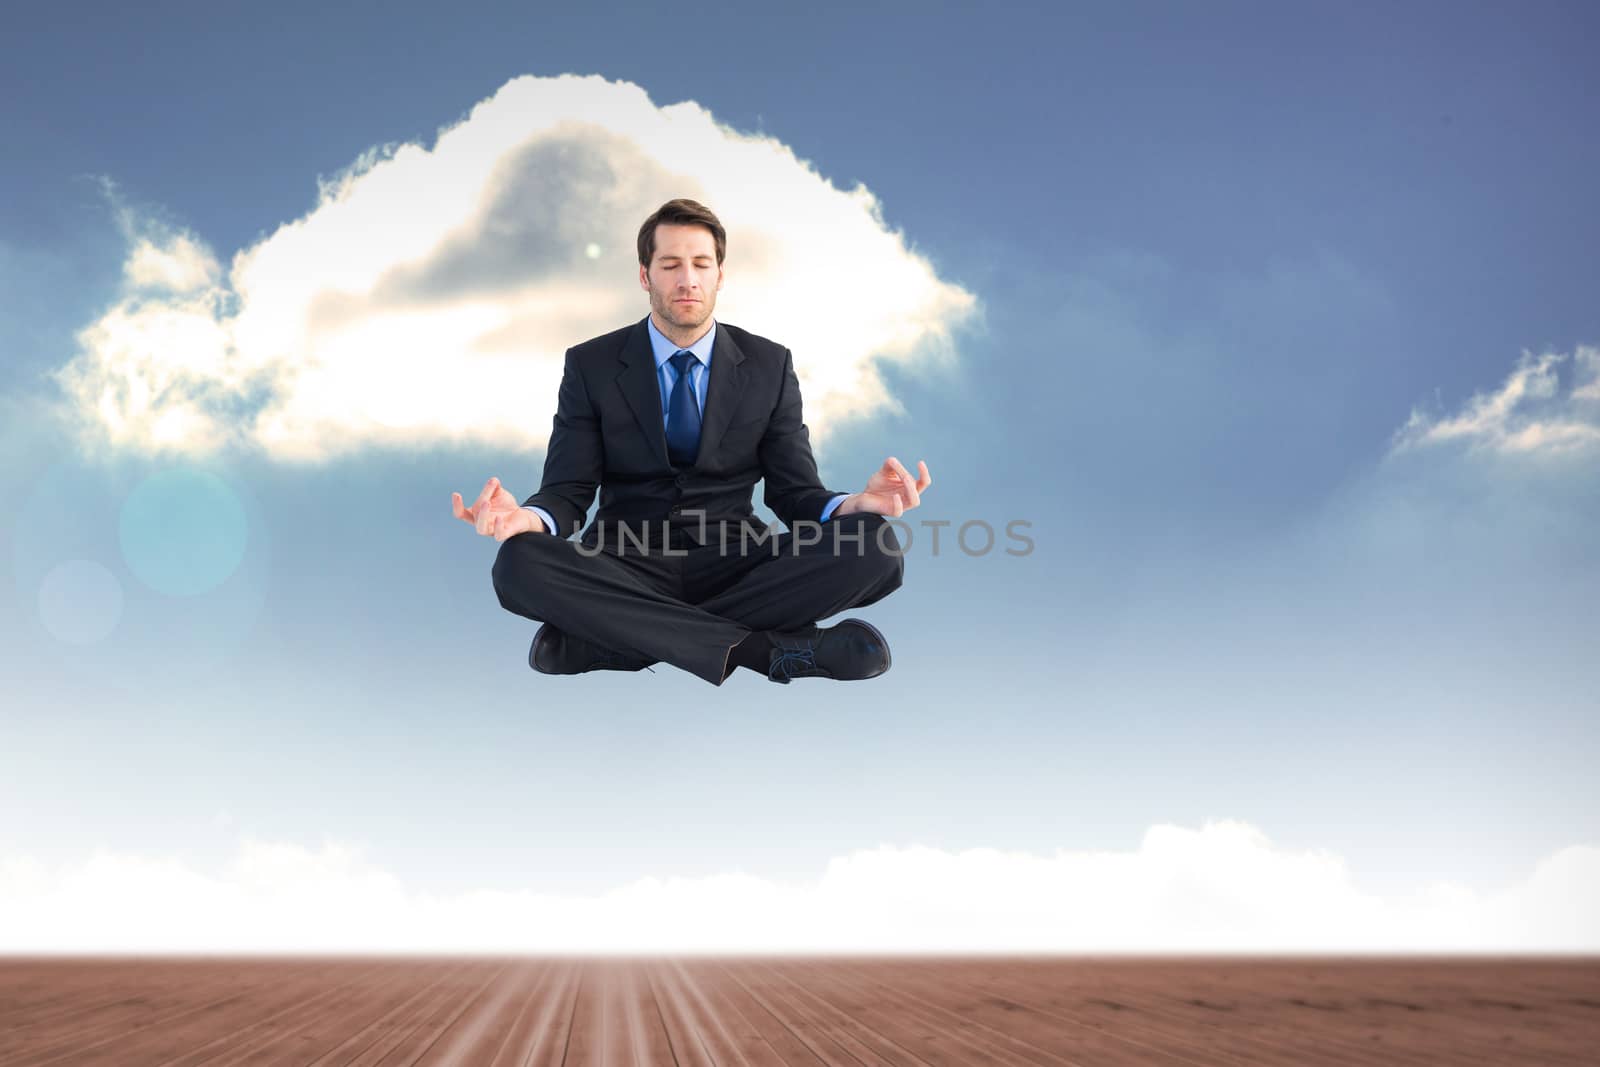 Calm businessman sitting in lotus pose against cloudy sky background